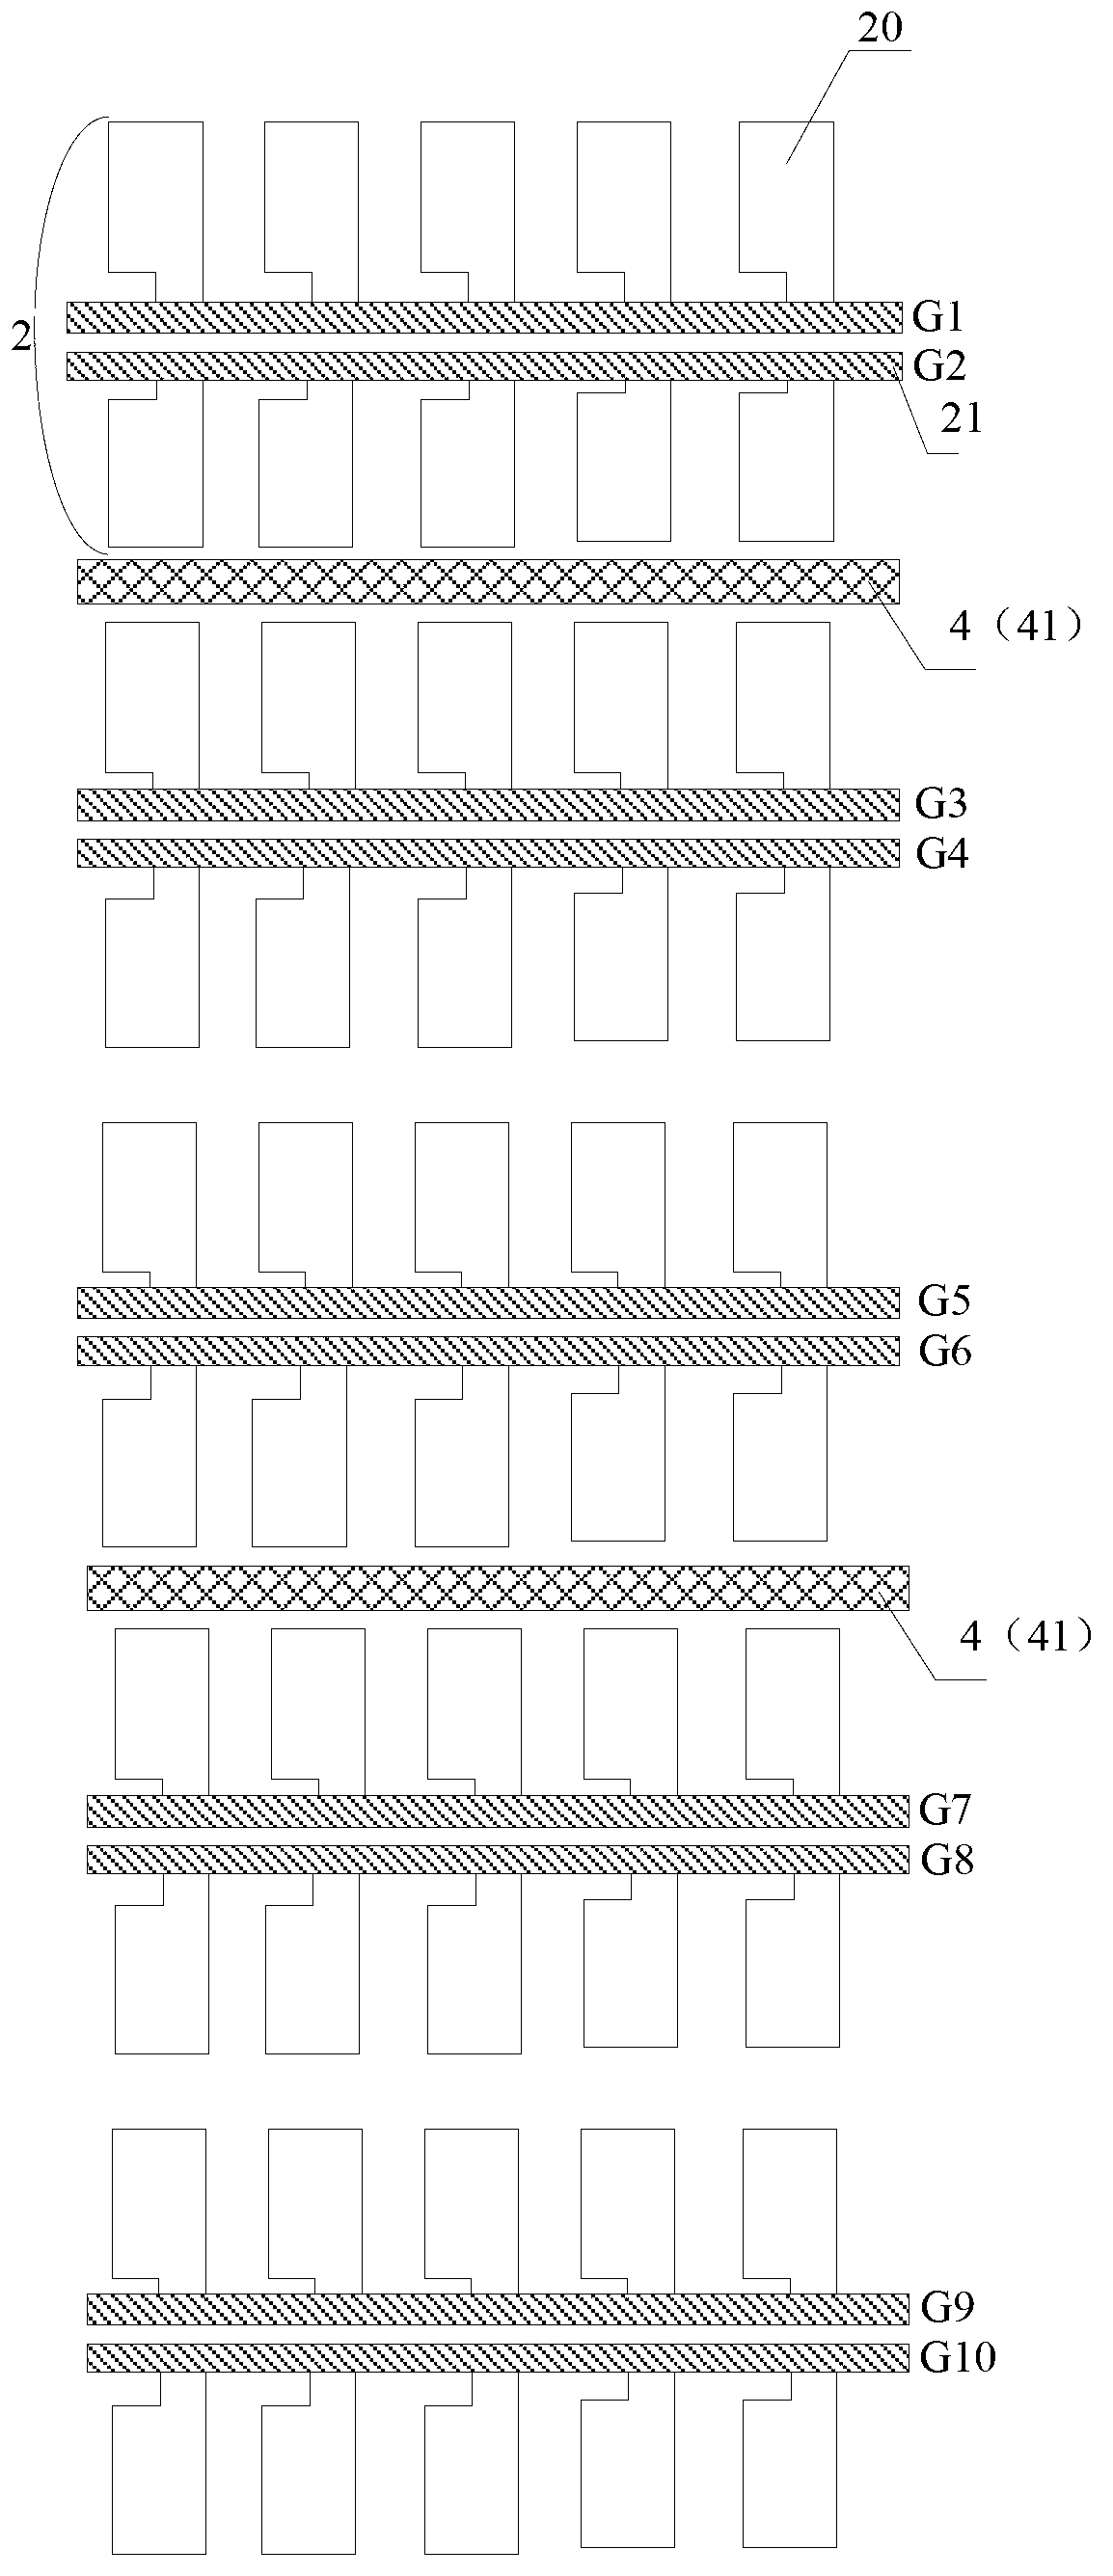 Built-in touch screen and display device